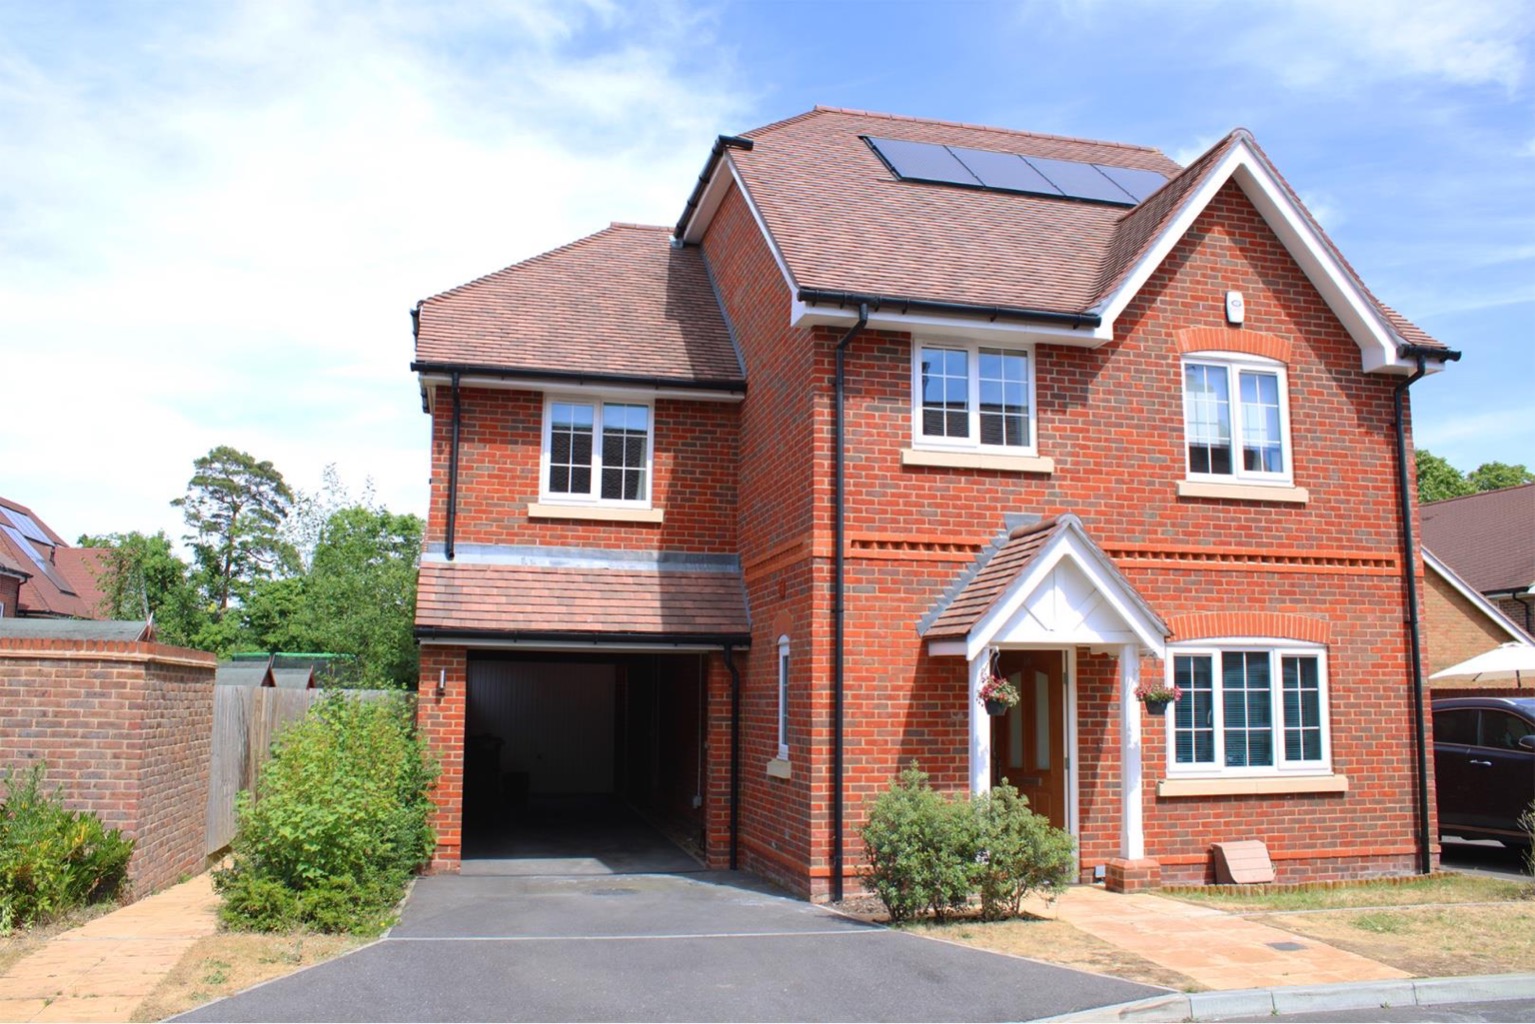 Marketed by Matthew Pulford from Avocado Property.   The property has four excellent sized bedrooms, two bathrooms, garage, car port and driveway parking.   This energy efficient four bedroom house is an ideal family home situated at Cavendish Park, around a mile from Wokingham Station.